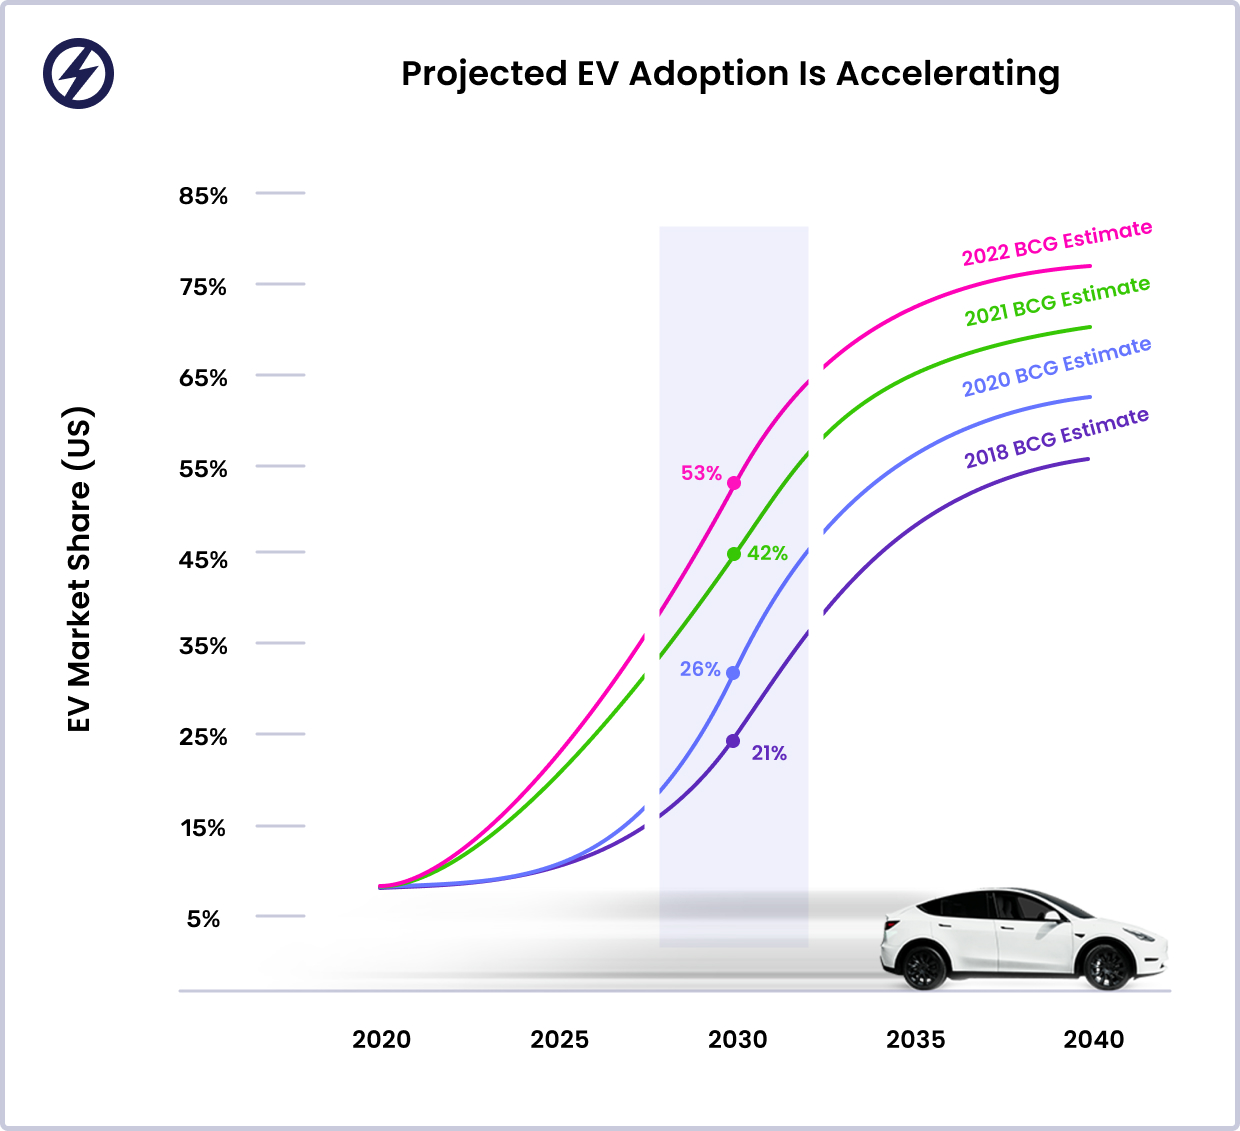 A comparison on EV adoption forecasts and projections from 2018 to 2022